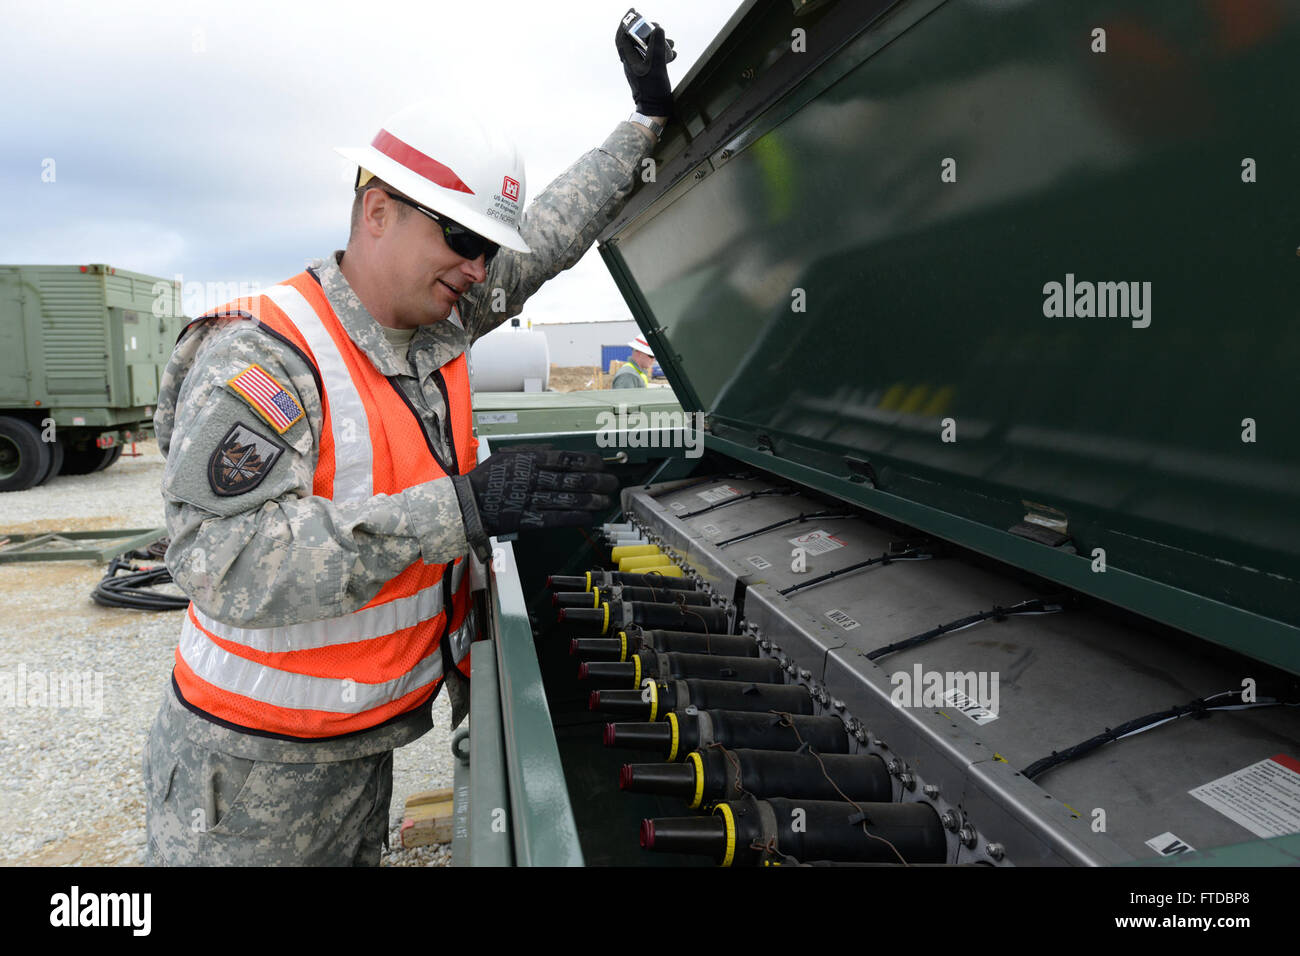 150419-N-TQ904-073 NAVAL SUPPORT FACILITY DEVESELU, Romania (April 19, 2015) Sgt. 1st Class Aaron Norris, from Millersport, Ohio, inspects an electrical switching box at Naval Support Facility Deveselu, Romania, April 19, 2015. Norris, a member of the 249th Engineer Battalion from Fort Belvoir, Virginia, helped install four portable generators at Deveselu’s Aegis Ashore facility. (U.S. Navy photo by Lt. Cmdr. Mike Billips/Released) Stock Photo